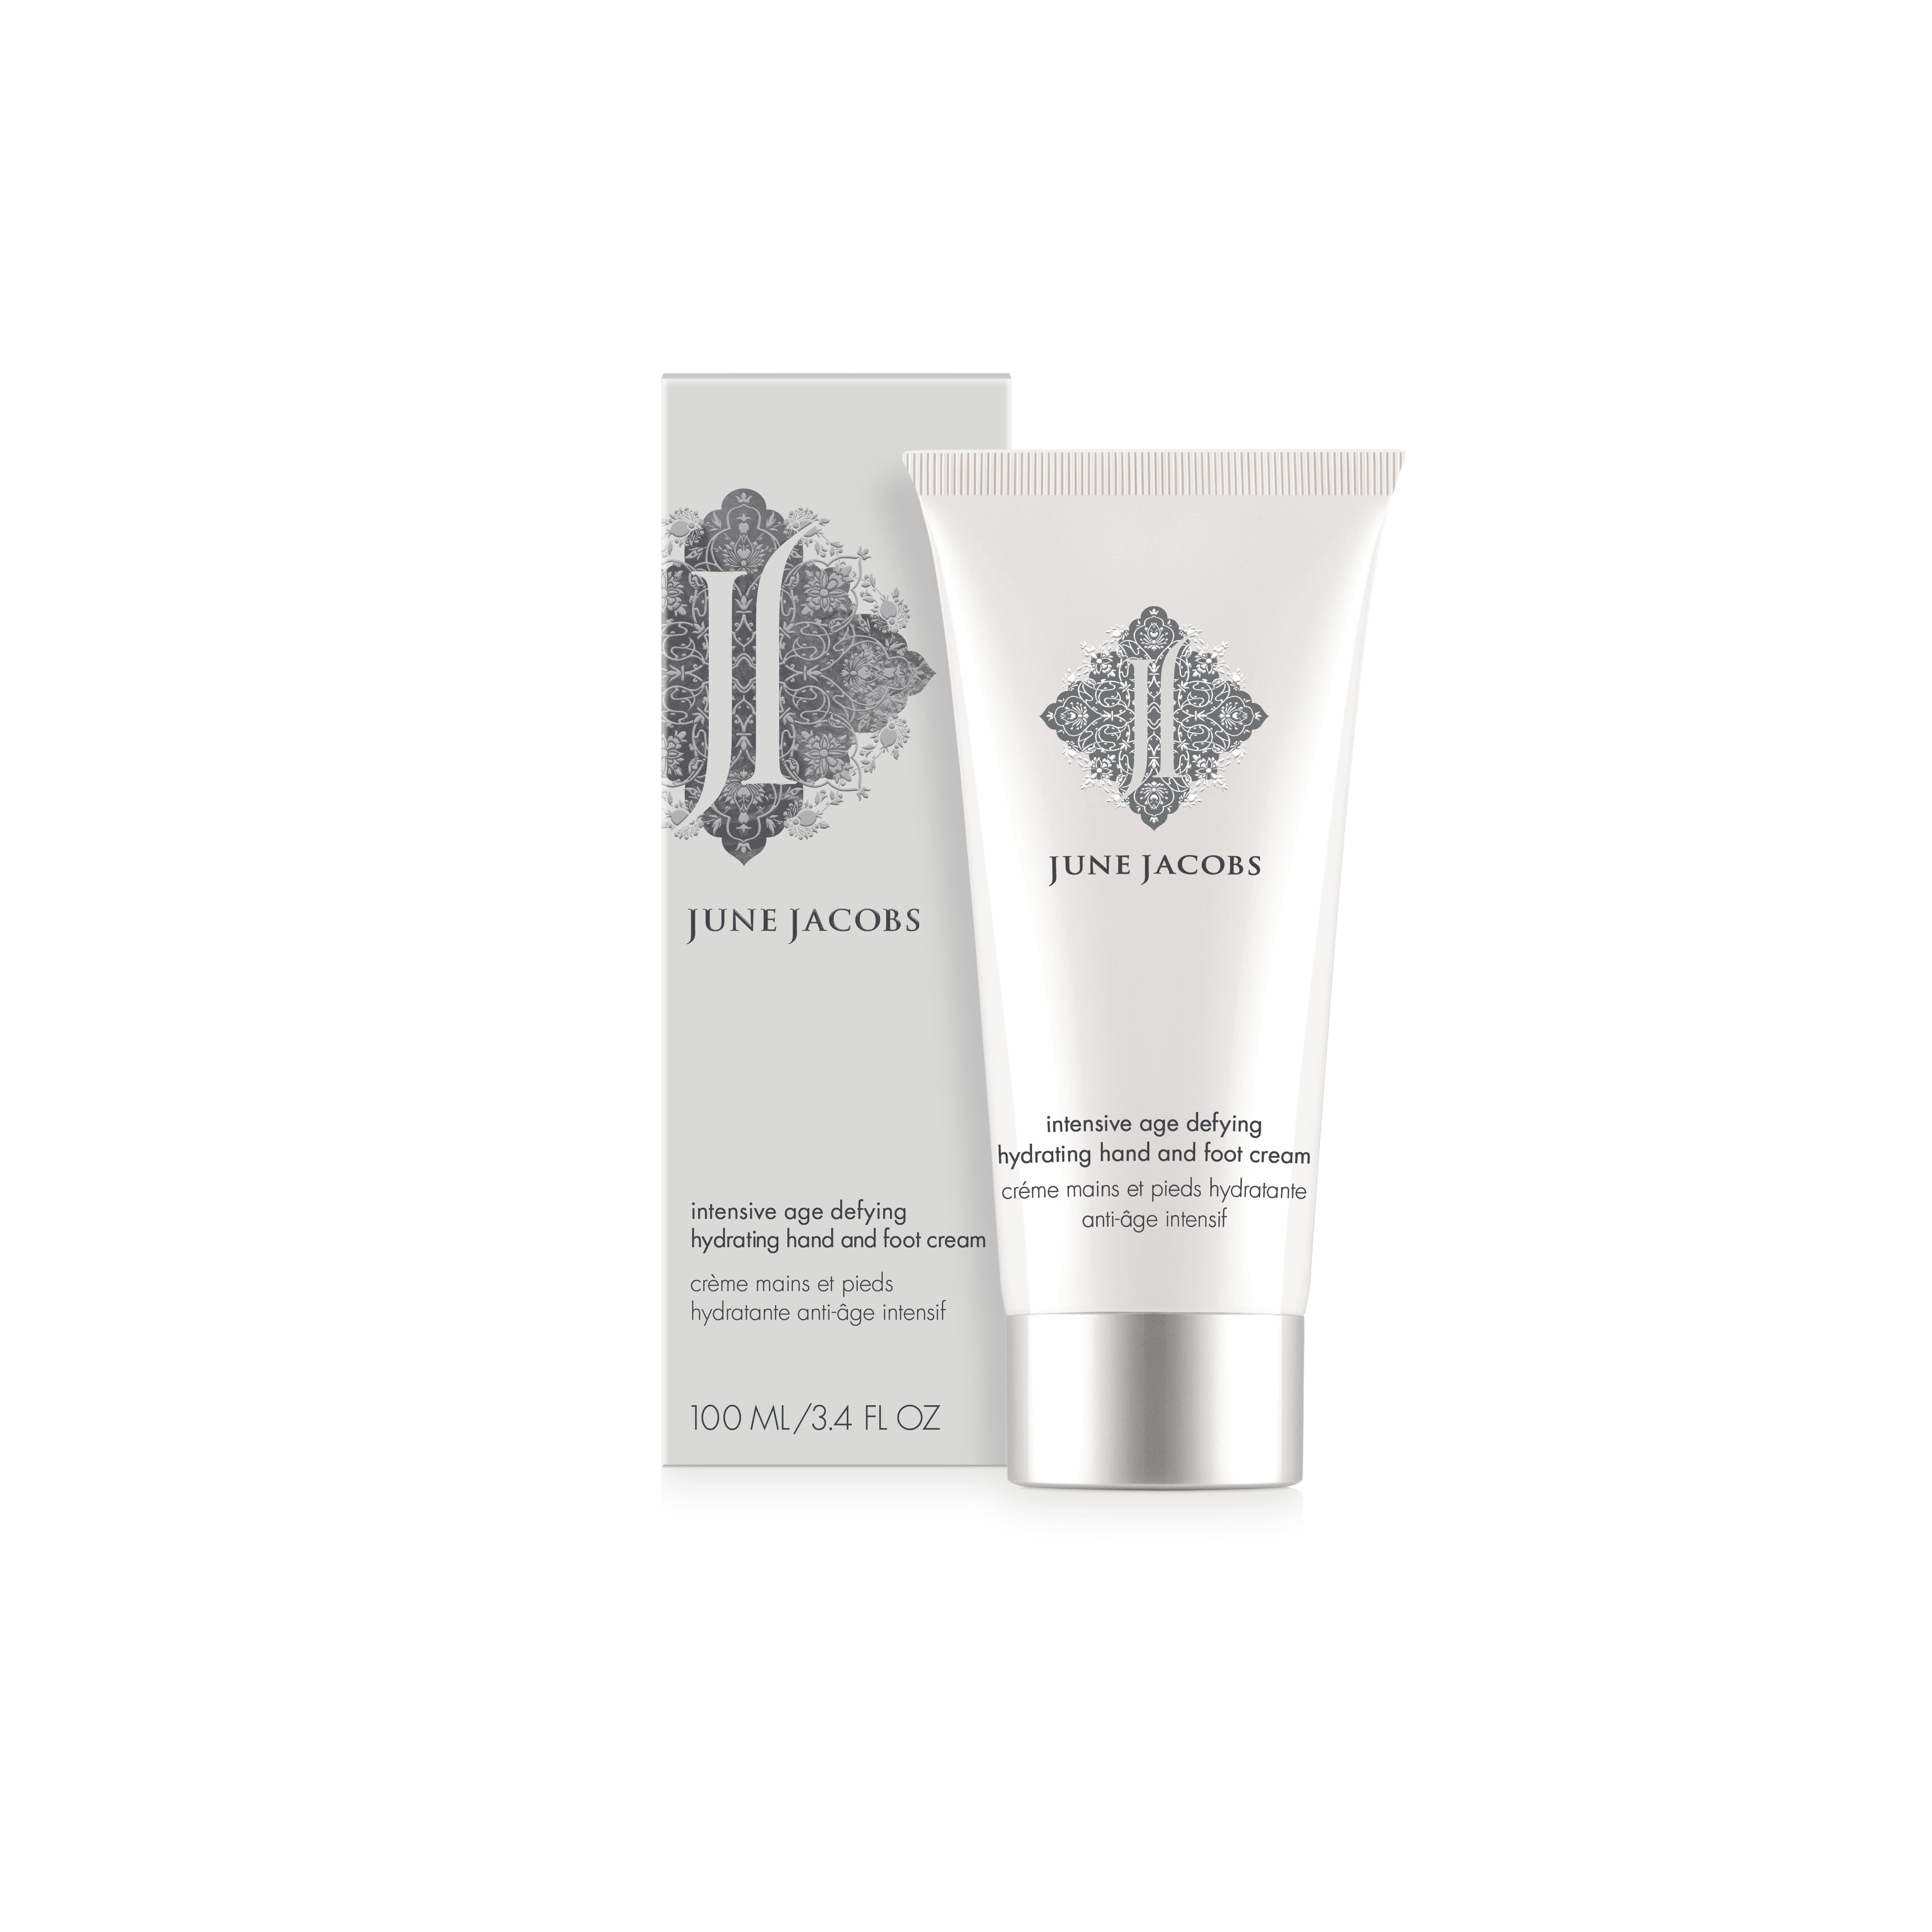 June Jacobs Intensive Age Defying Hydrating Hand And Foot Cream 3.4oz